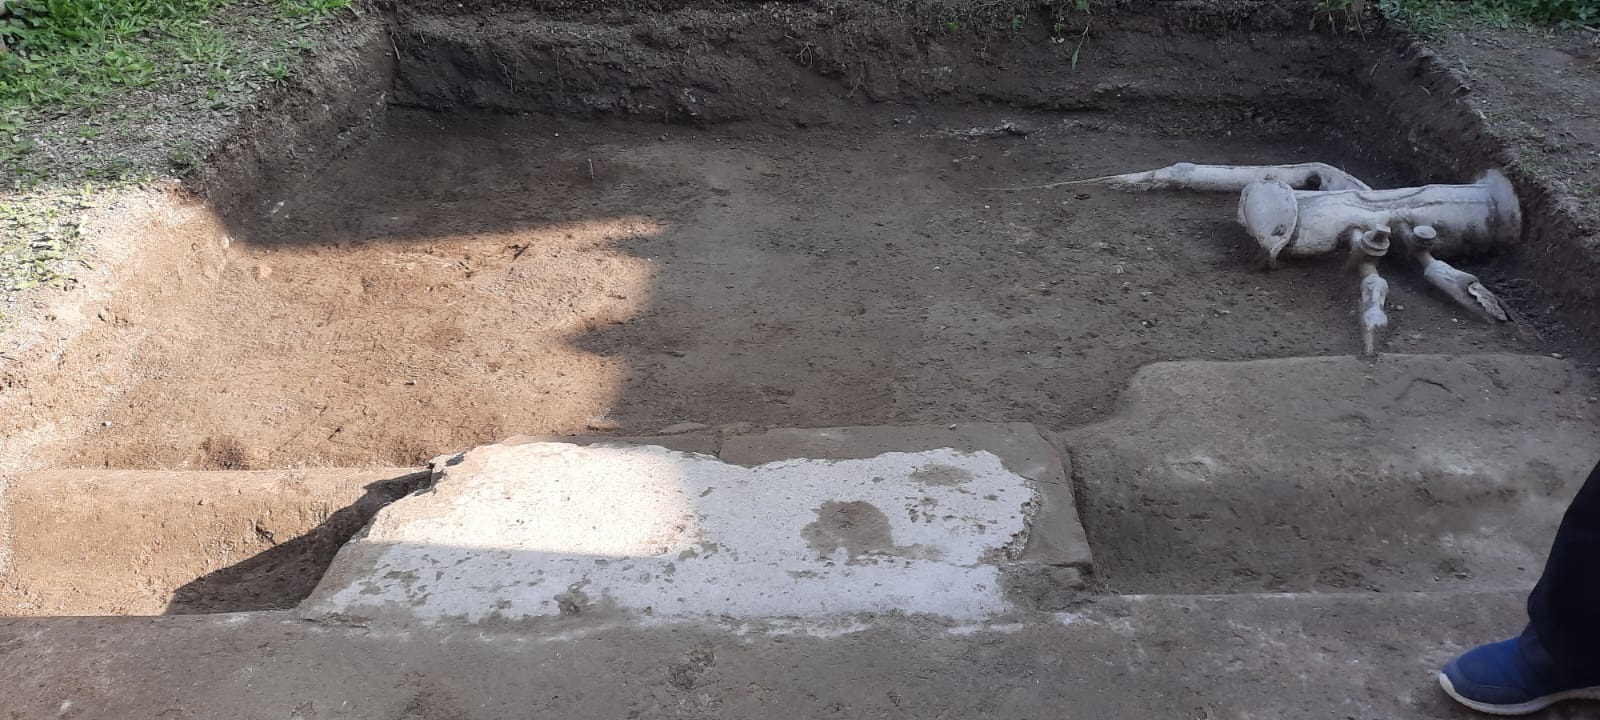 Roman water tank with pipes, valves revealed – The History Blog